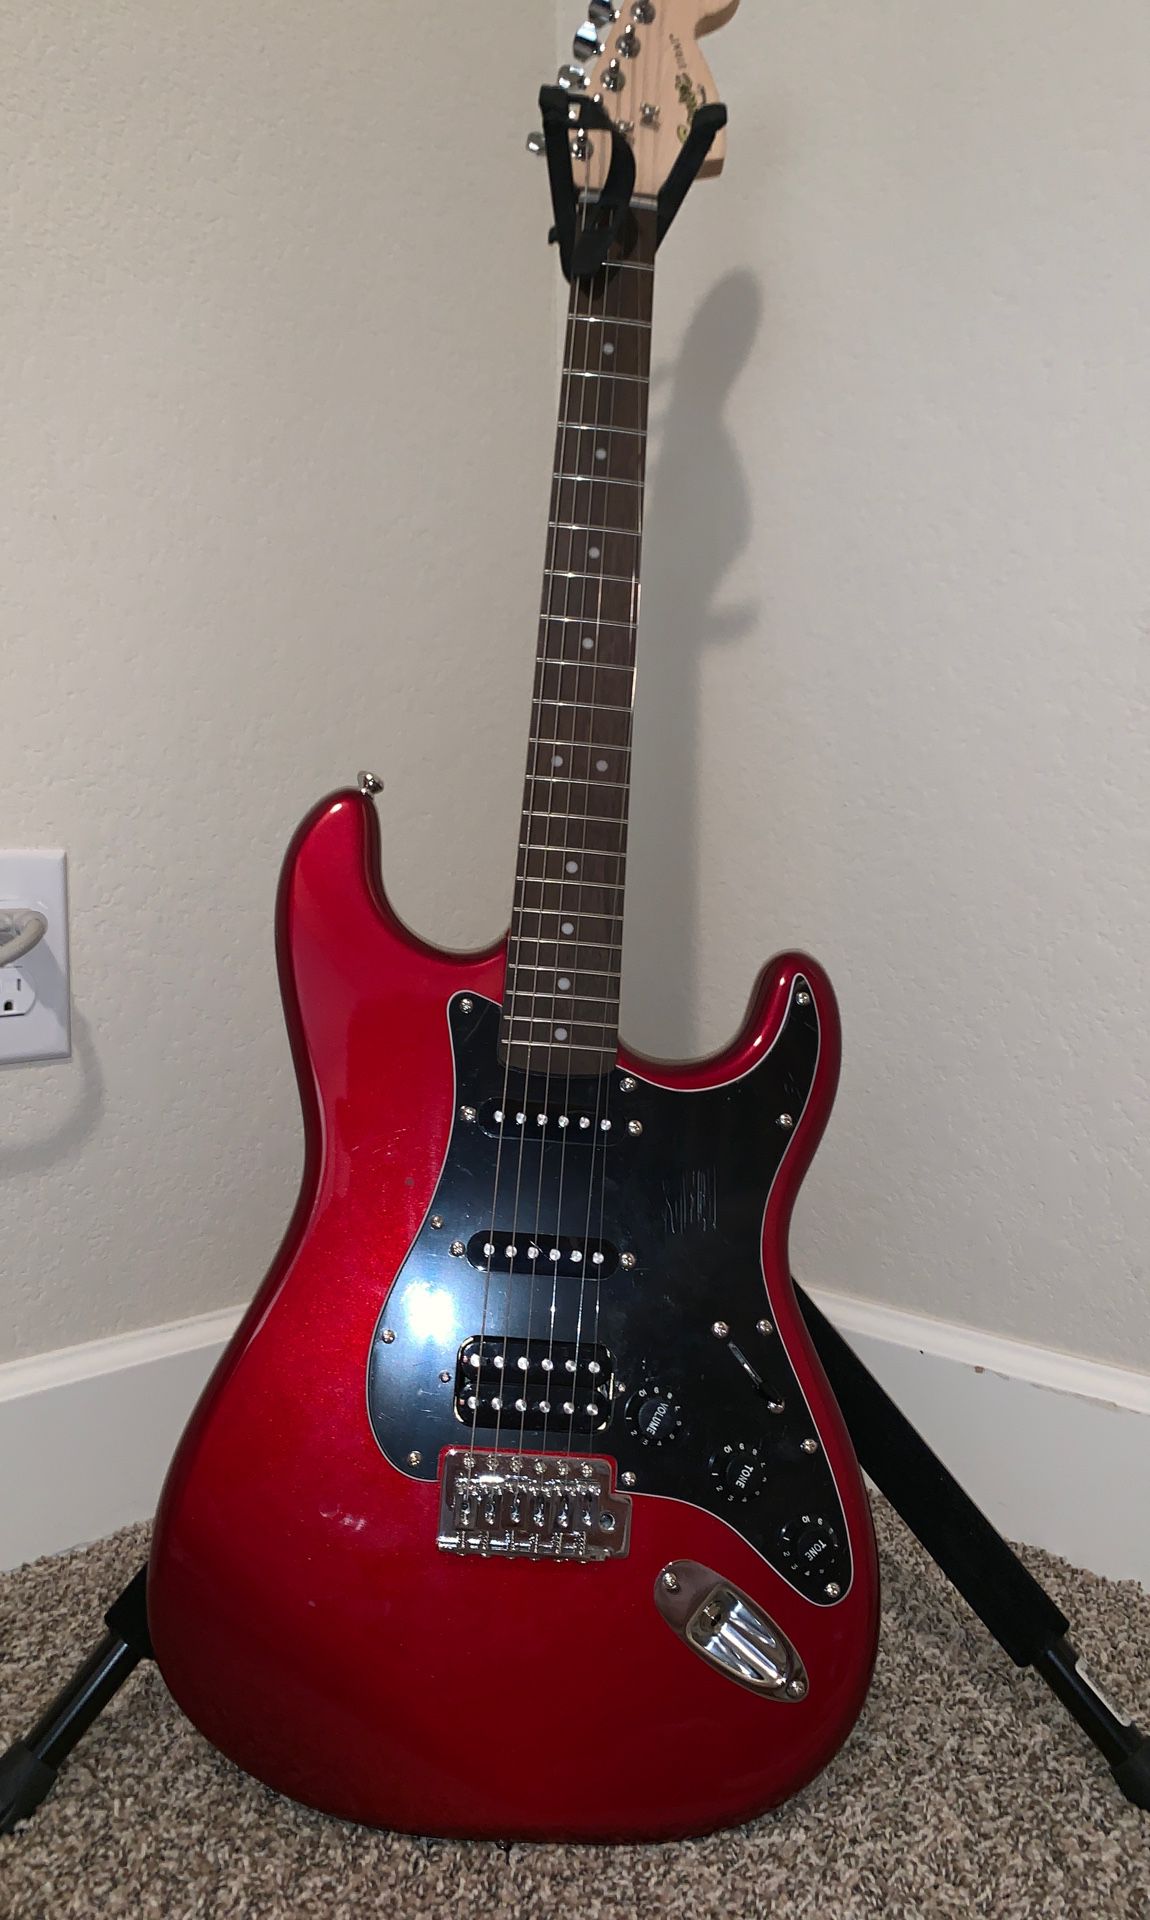 Fender electric guitar! Comes with bag and extra picks used it a little in high school but never learned how to play it properly trying to give it so